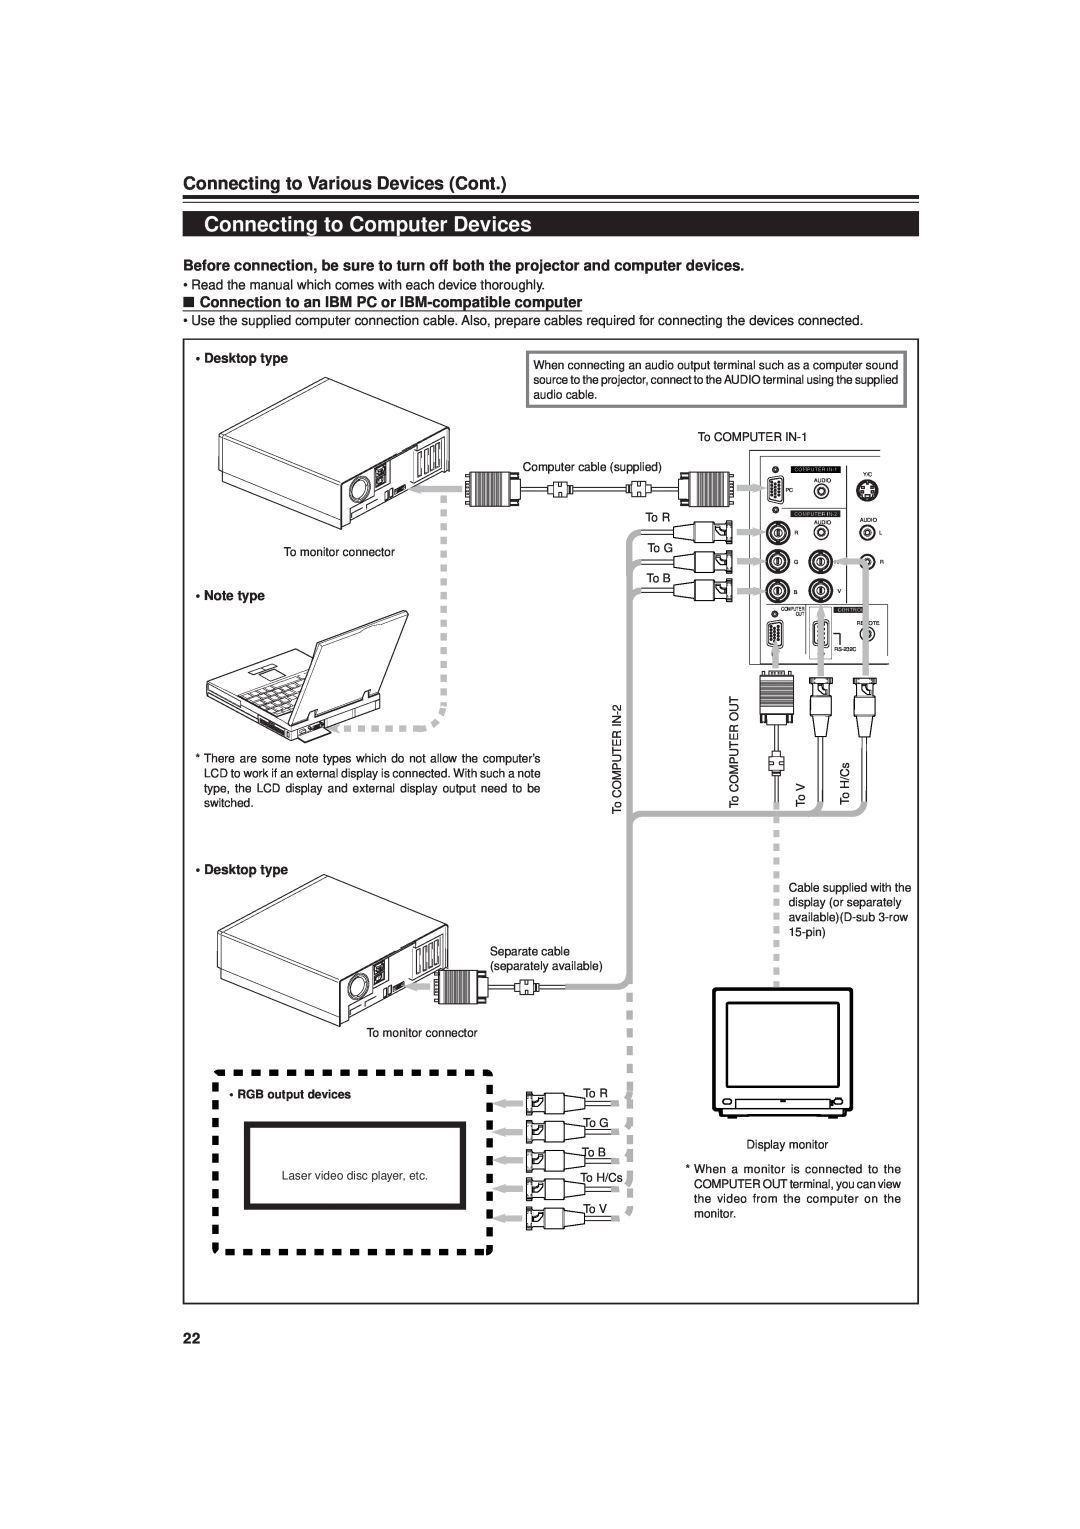 JVC DLA-G20U manual Connecting to Computer Devices, Connecting to Various Devices Cont, Desktop type, Note type 